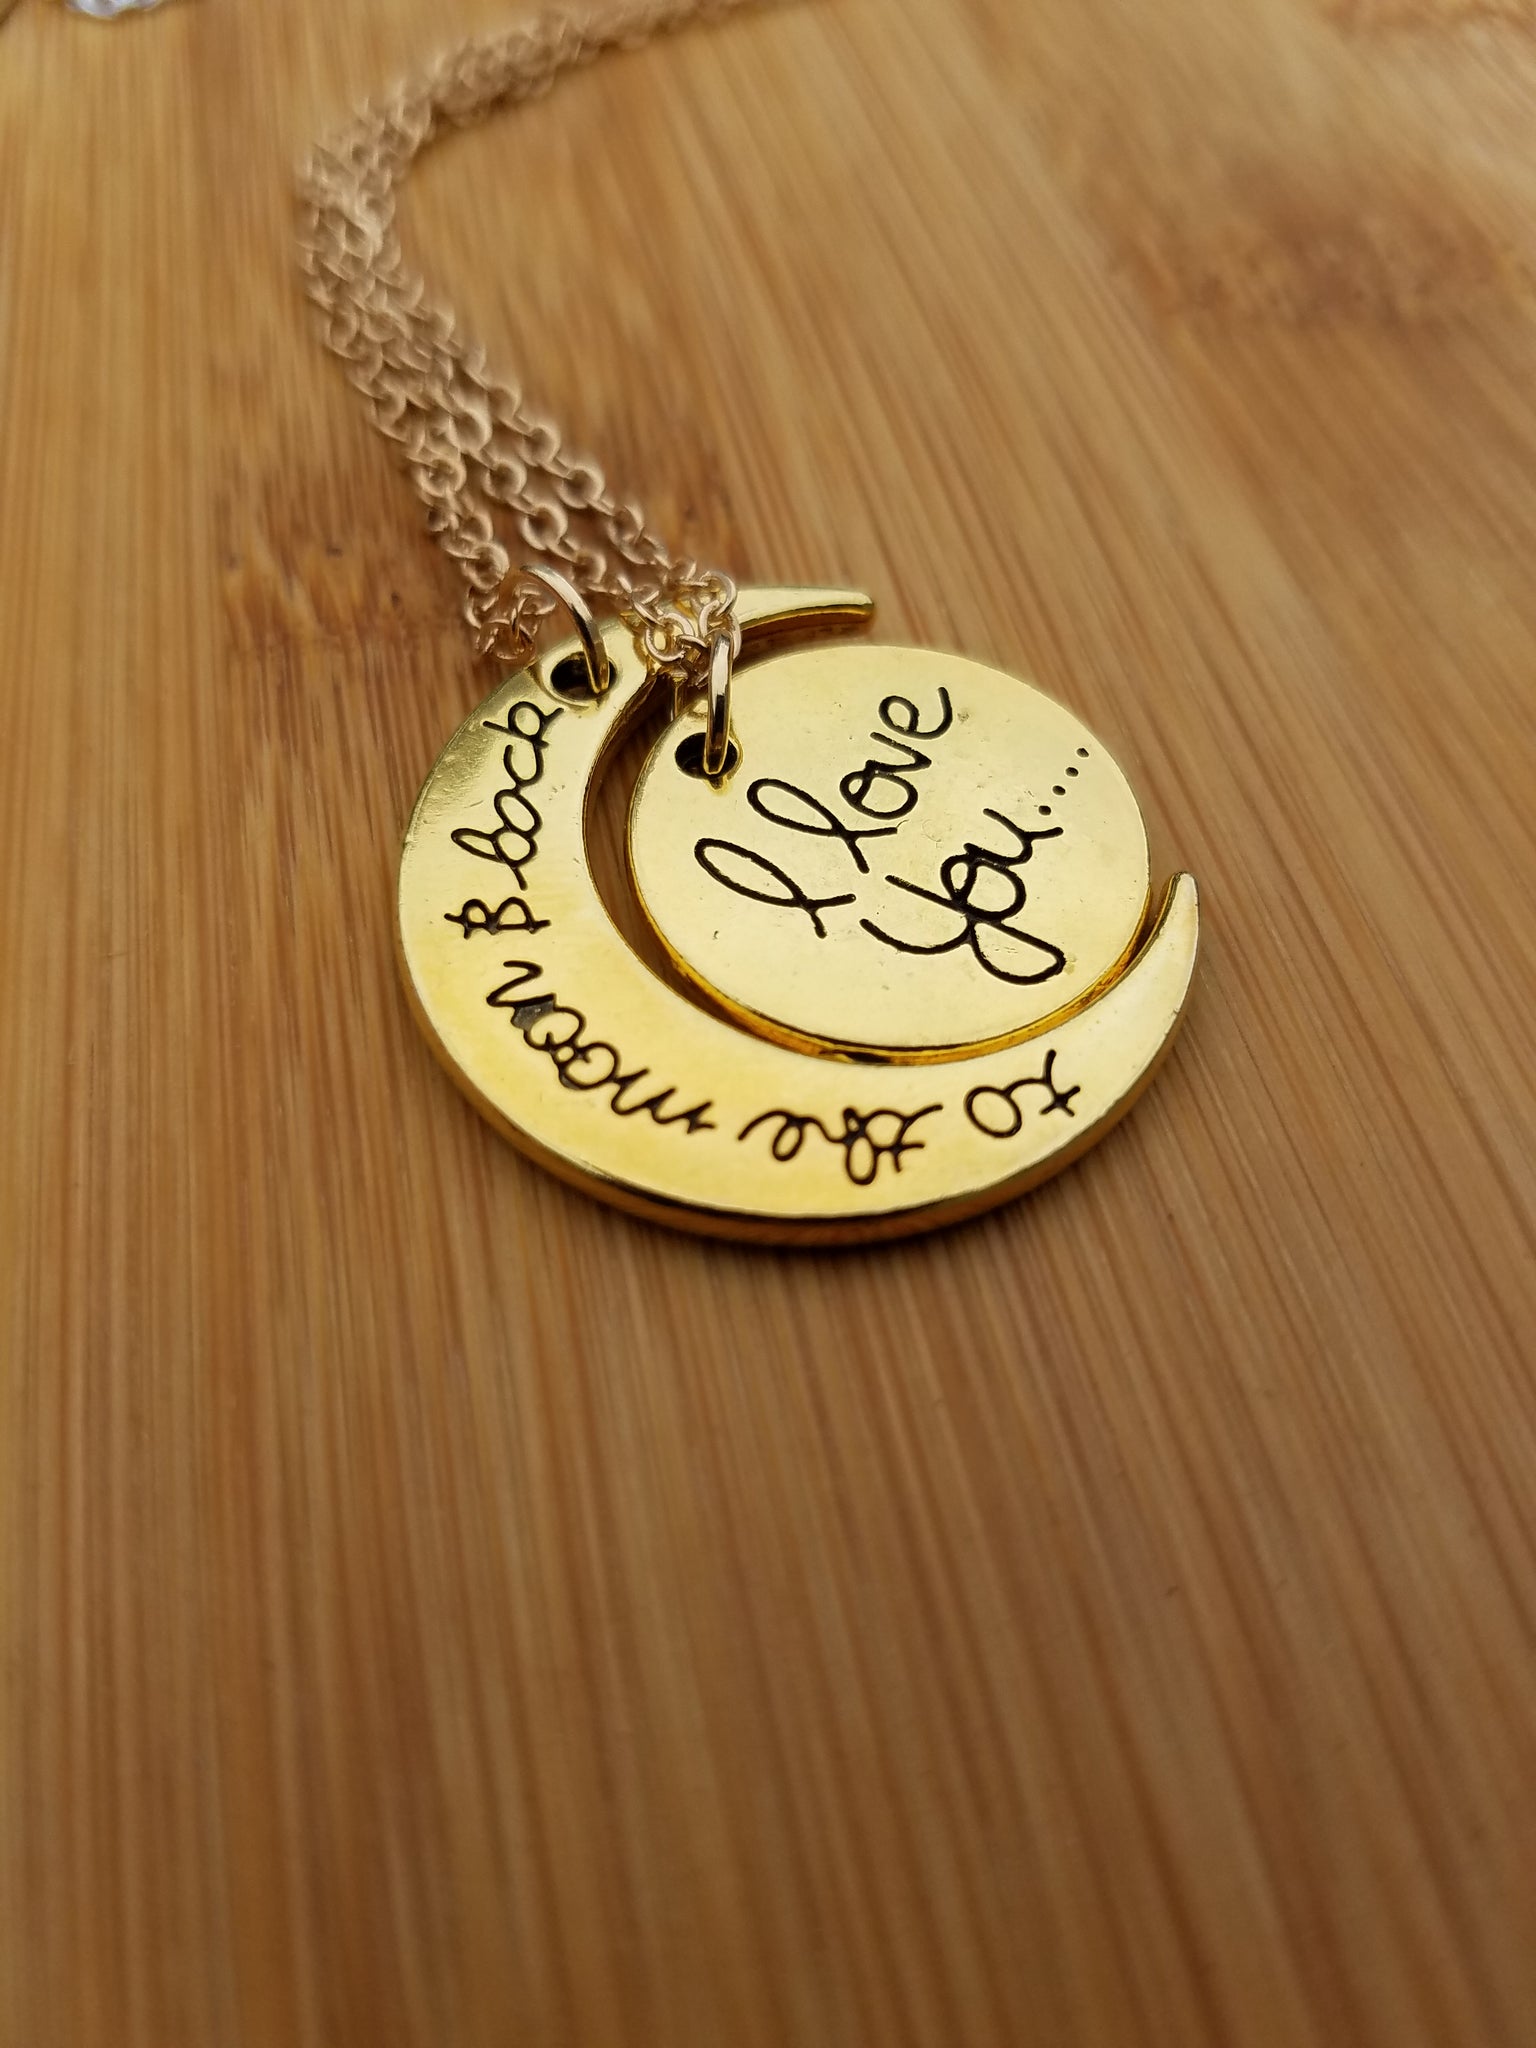 I Love You To The Moon And Back Gold & Silver Heart Family Necklace Pendant  UK | eBay